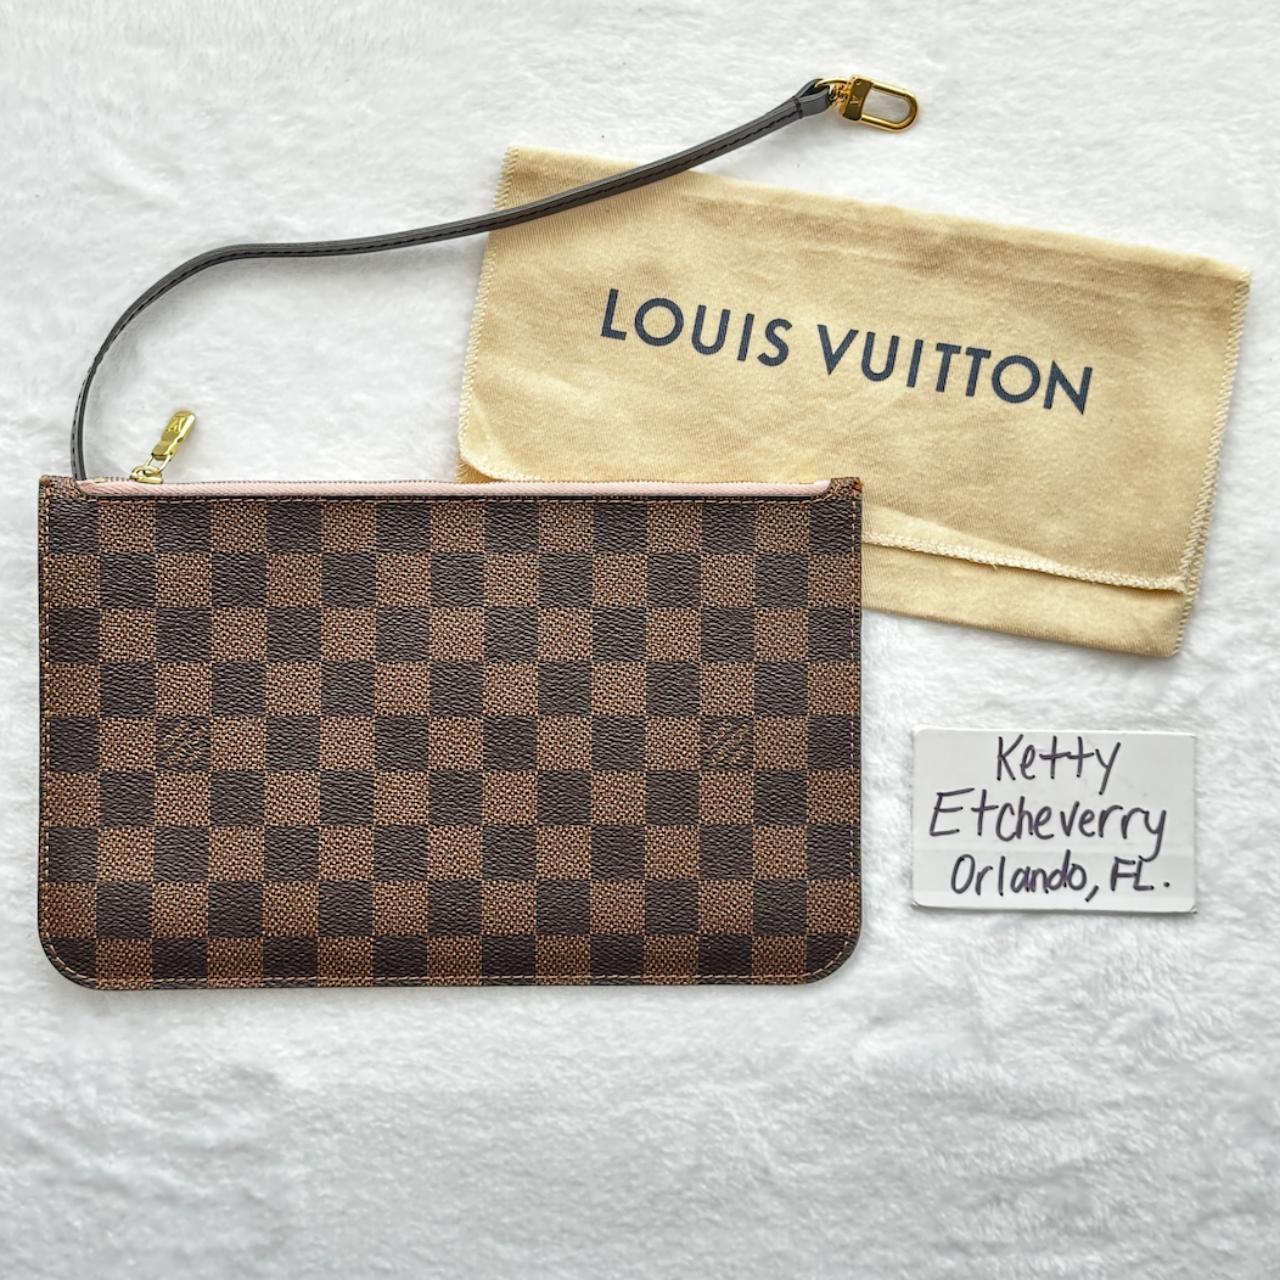 How to Spot Authentic Louis Vuitton Damier Ebene Neverfull MM Bag and where  to Find the Date Code 